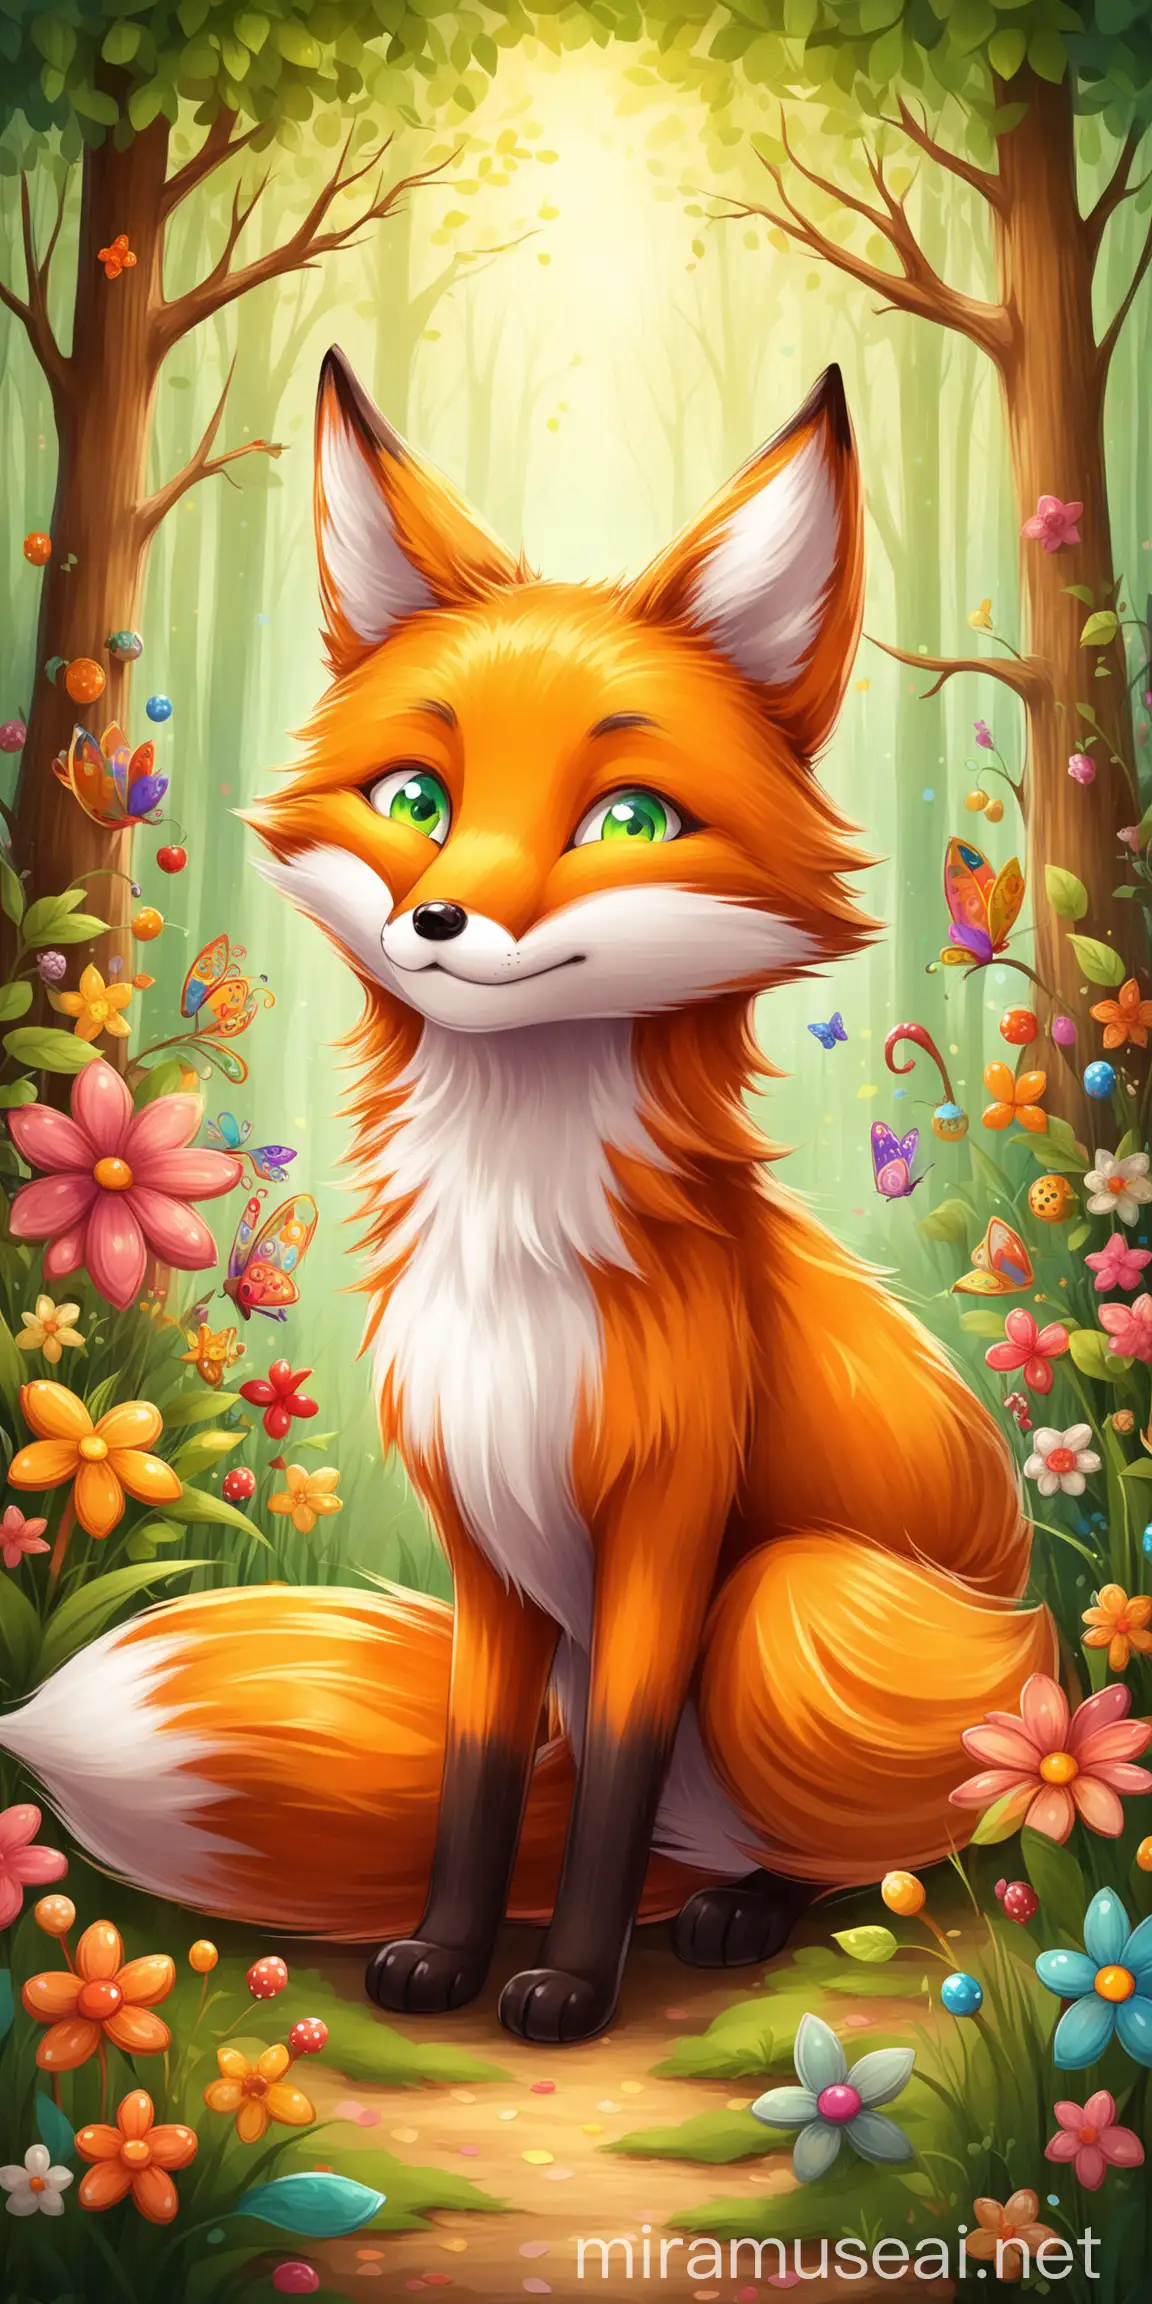 "Create a beautiful, full-length image of a fox designed for children. The fox should be friendly and approachable, with bright, expressive eyes and a playful smile. The fur should be soft and well-detailed, featuring vibrant, warm colors. The background should be a whimsical forest scene with gentle lighting, colorful plants, and perhaps some other friendly forest animals. Make sure the overall style is cute and appealing to young children."